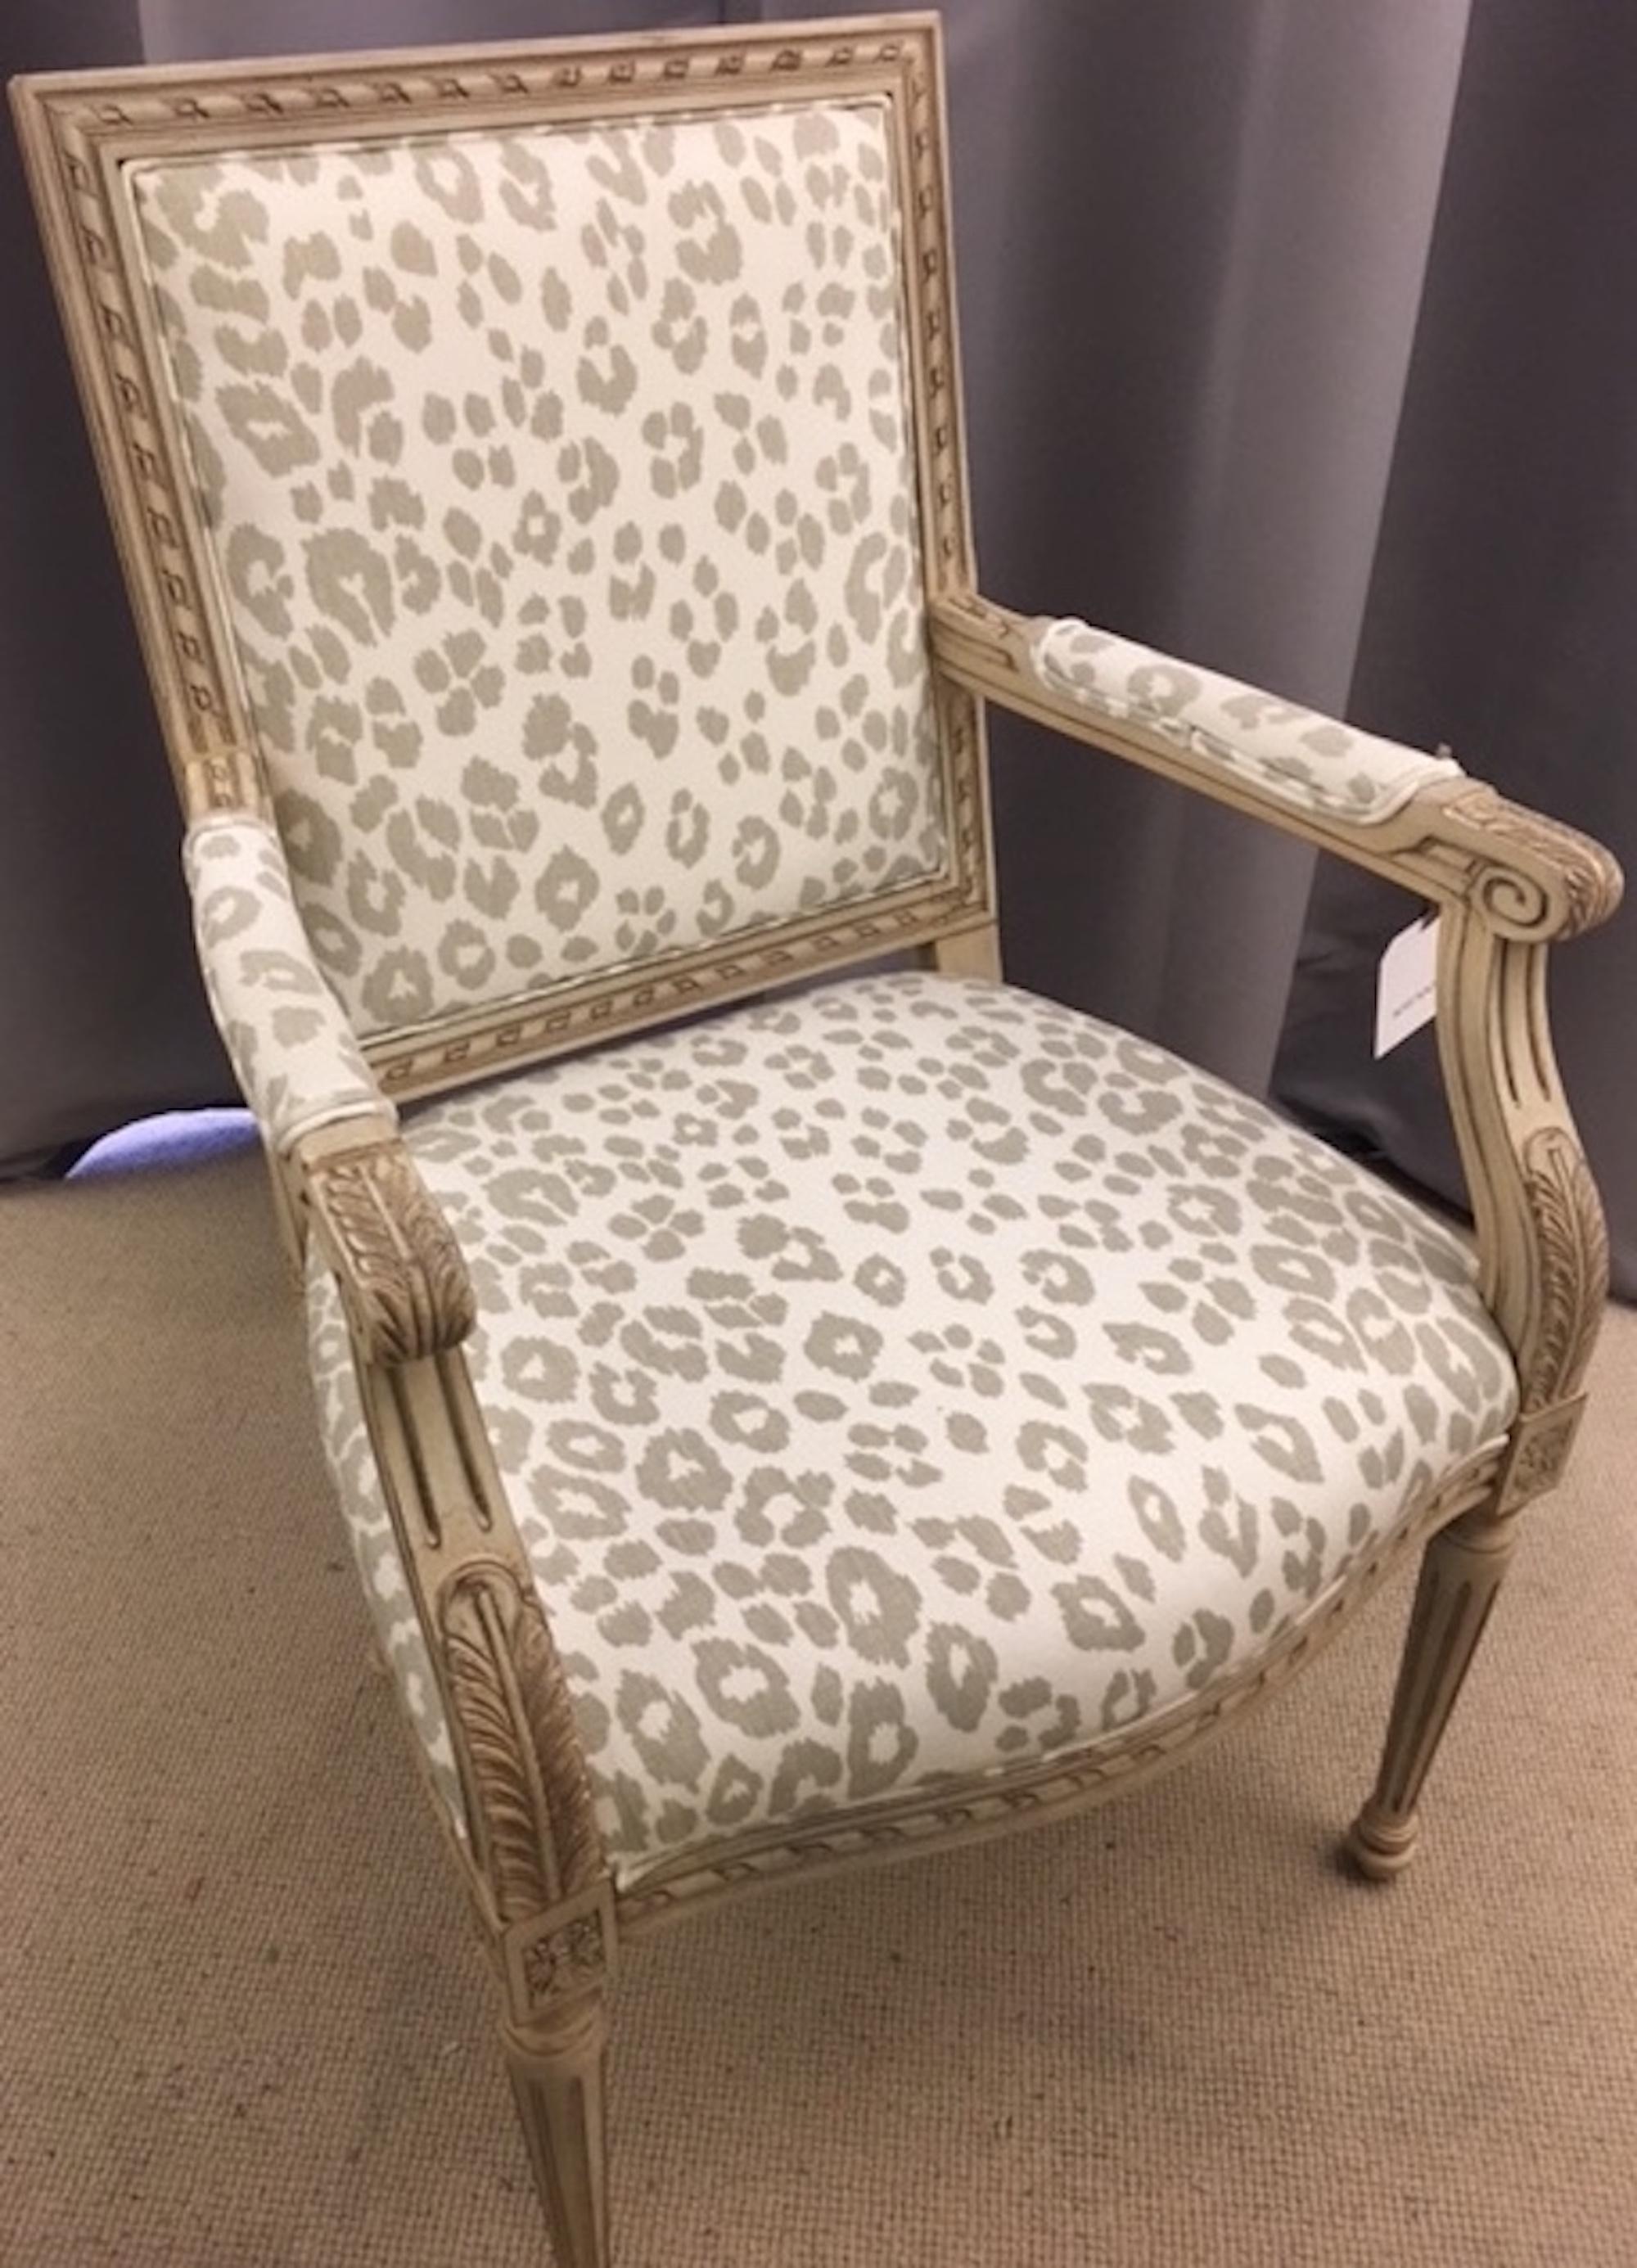 This exquisite Schumacher French Louis XVI side chair features a Classic frame, hand carved from European beechwood finished in a metropolitan grey colorway. The frame and elbow rests are both upholstered in an eternally chic Schumacher Signature